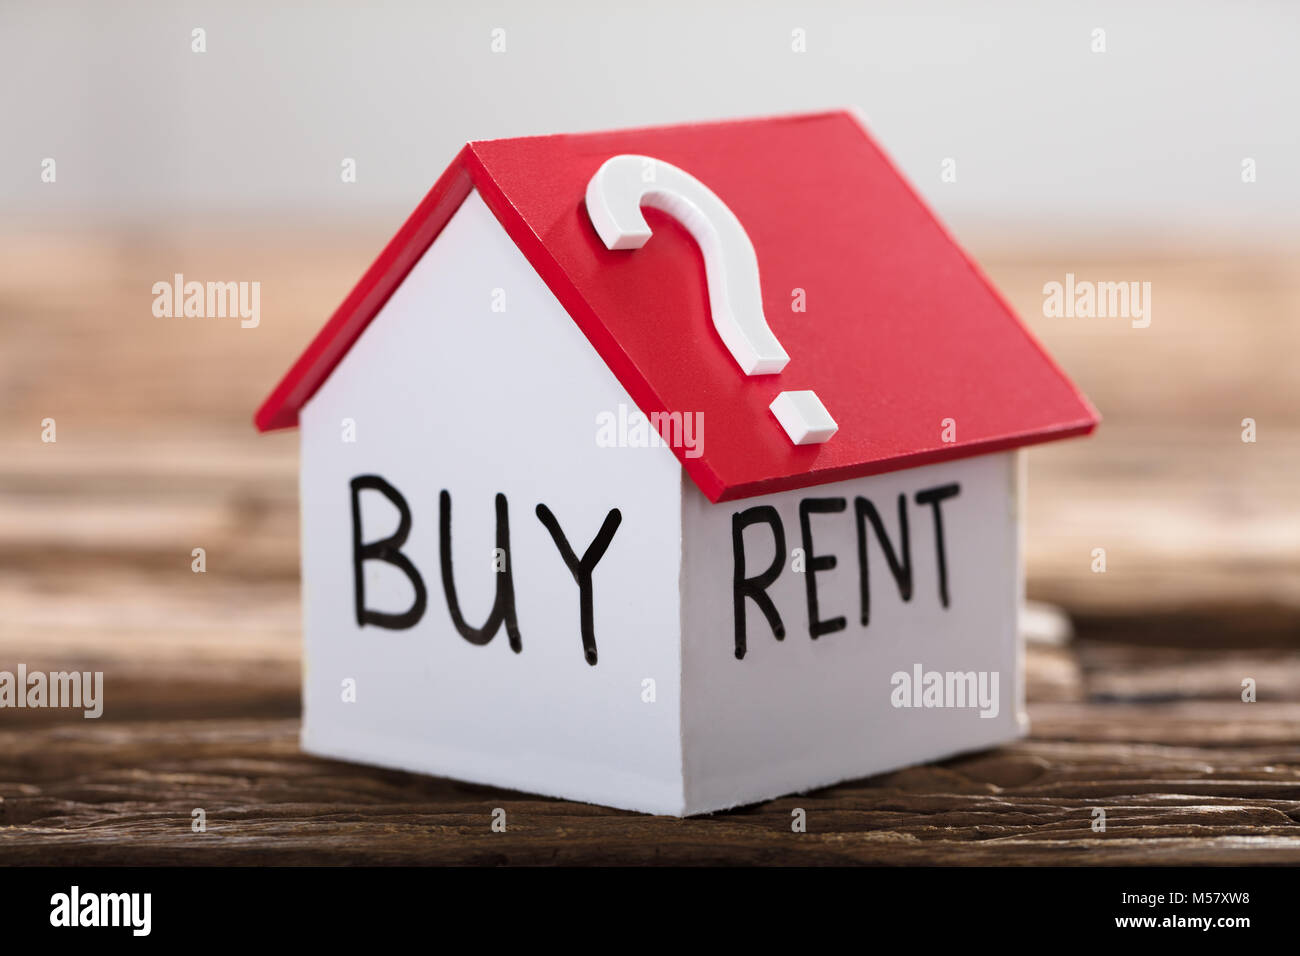 Closeup of buy or rent text with question mark on model house on wood Stock Photo